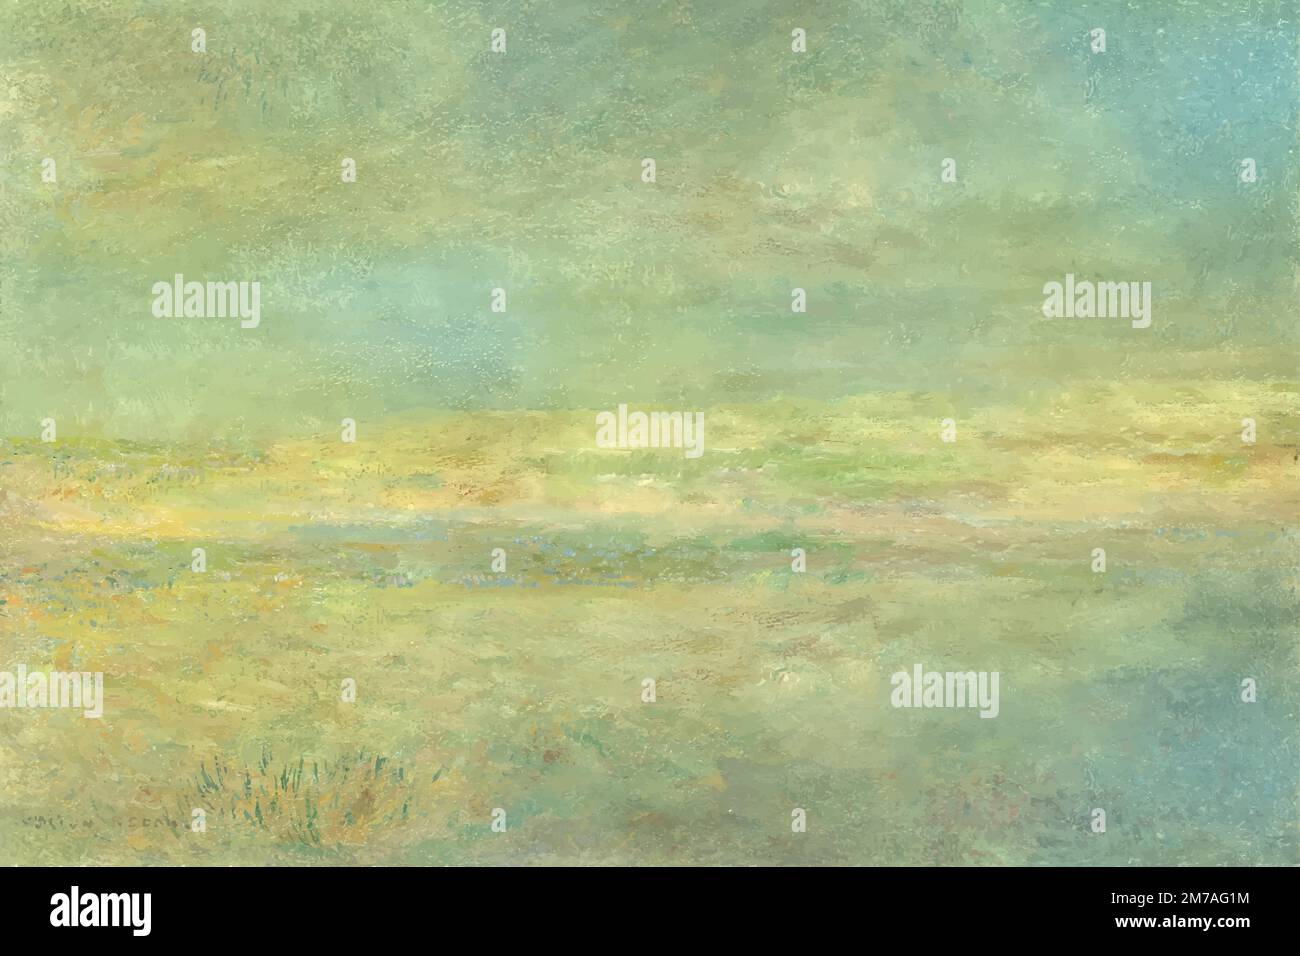 Green grungy wall background vector Stock Vector